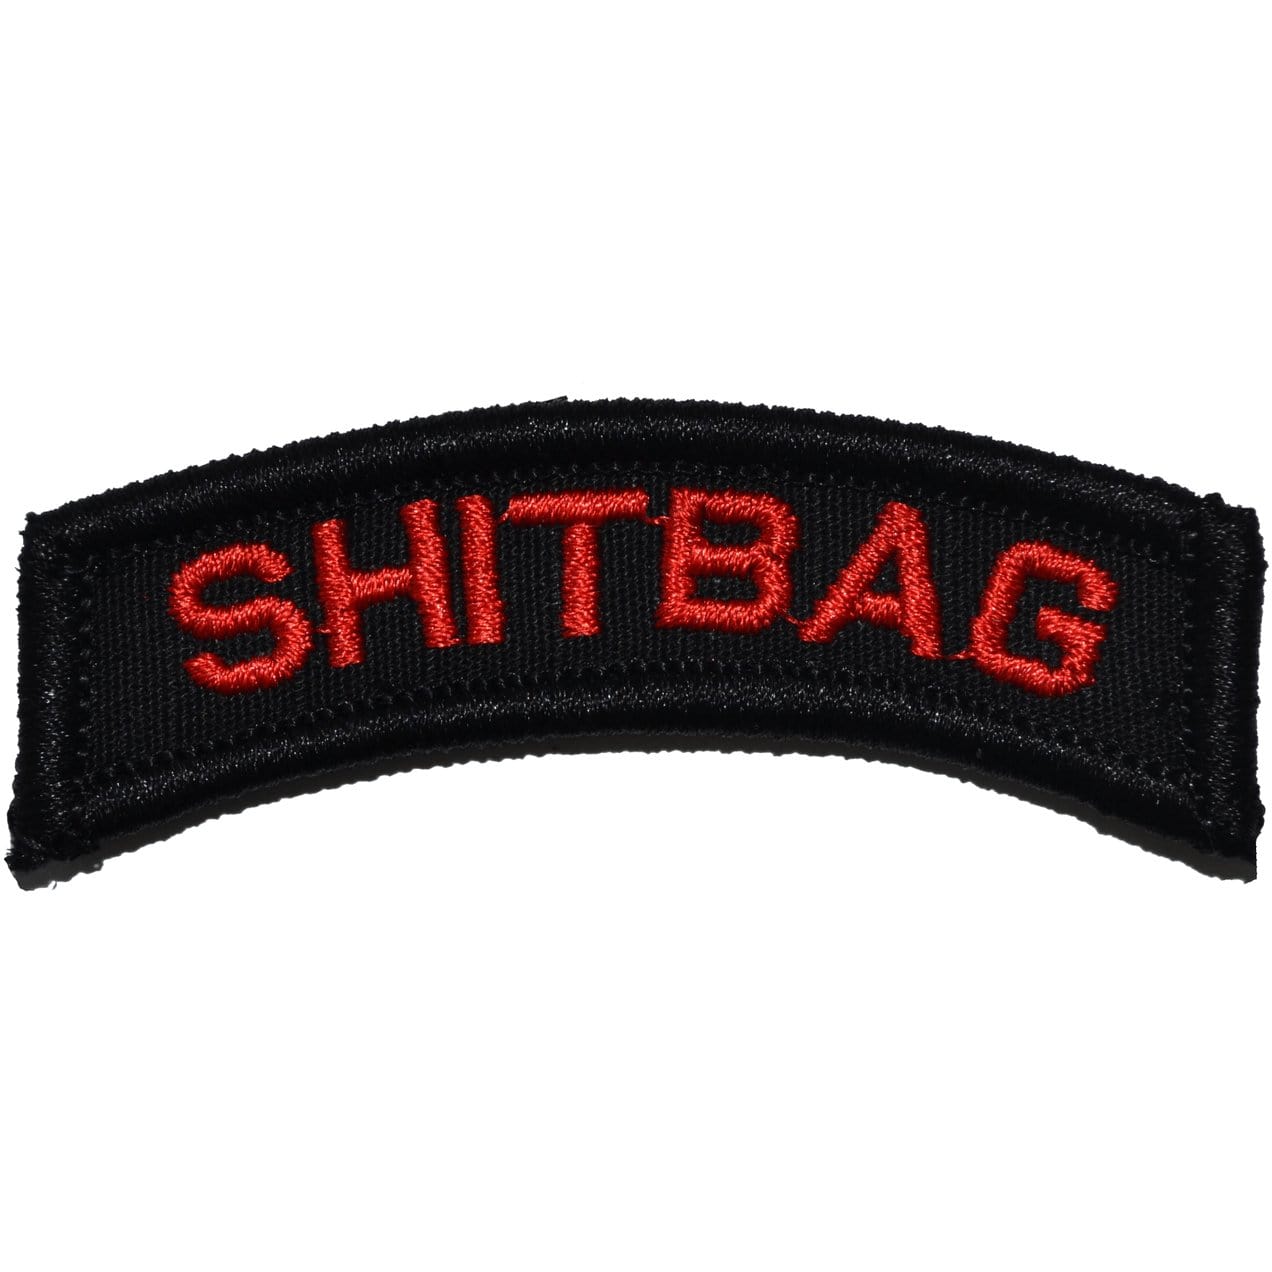 Tactical Gear Junkie Patches Black w/ Red Shitbag Tab Patch